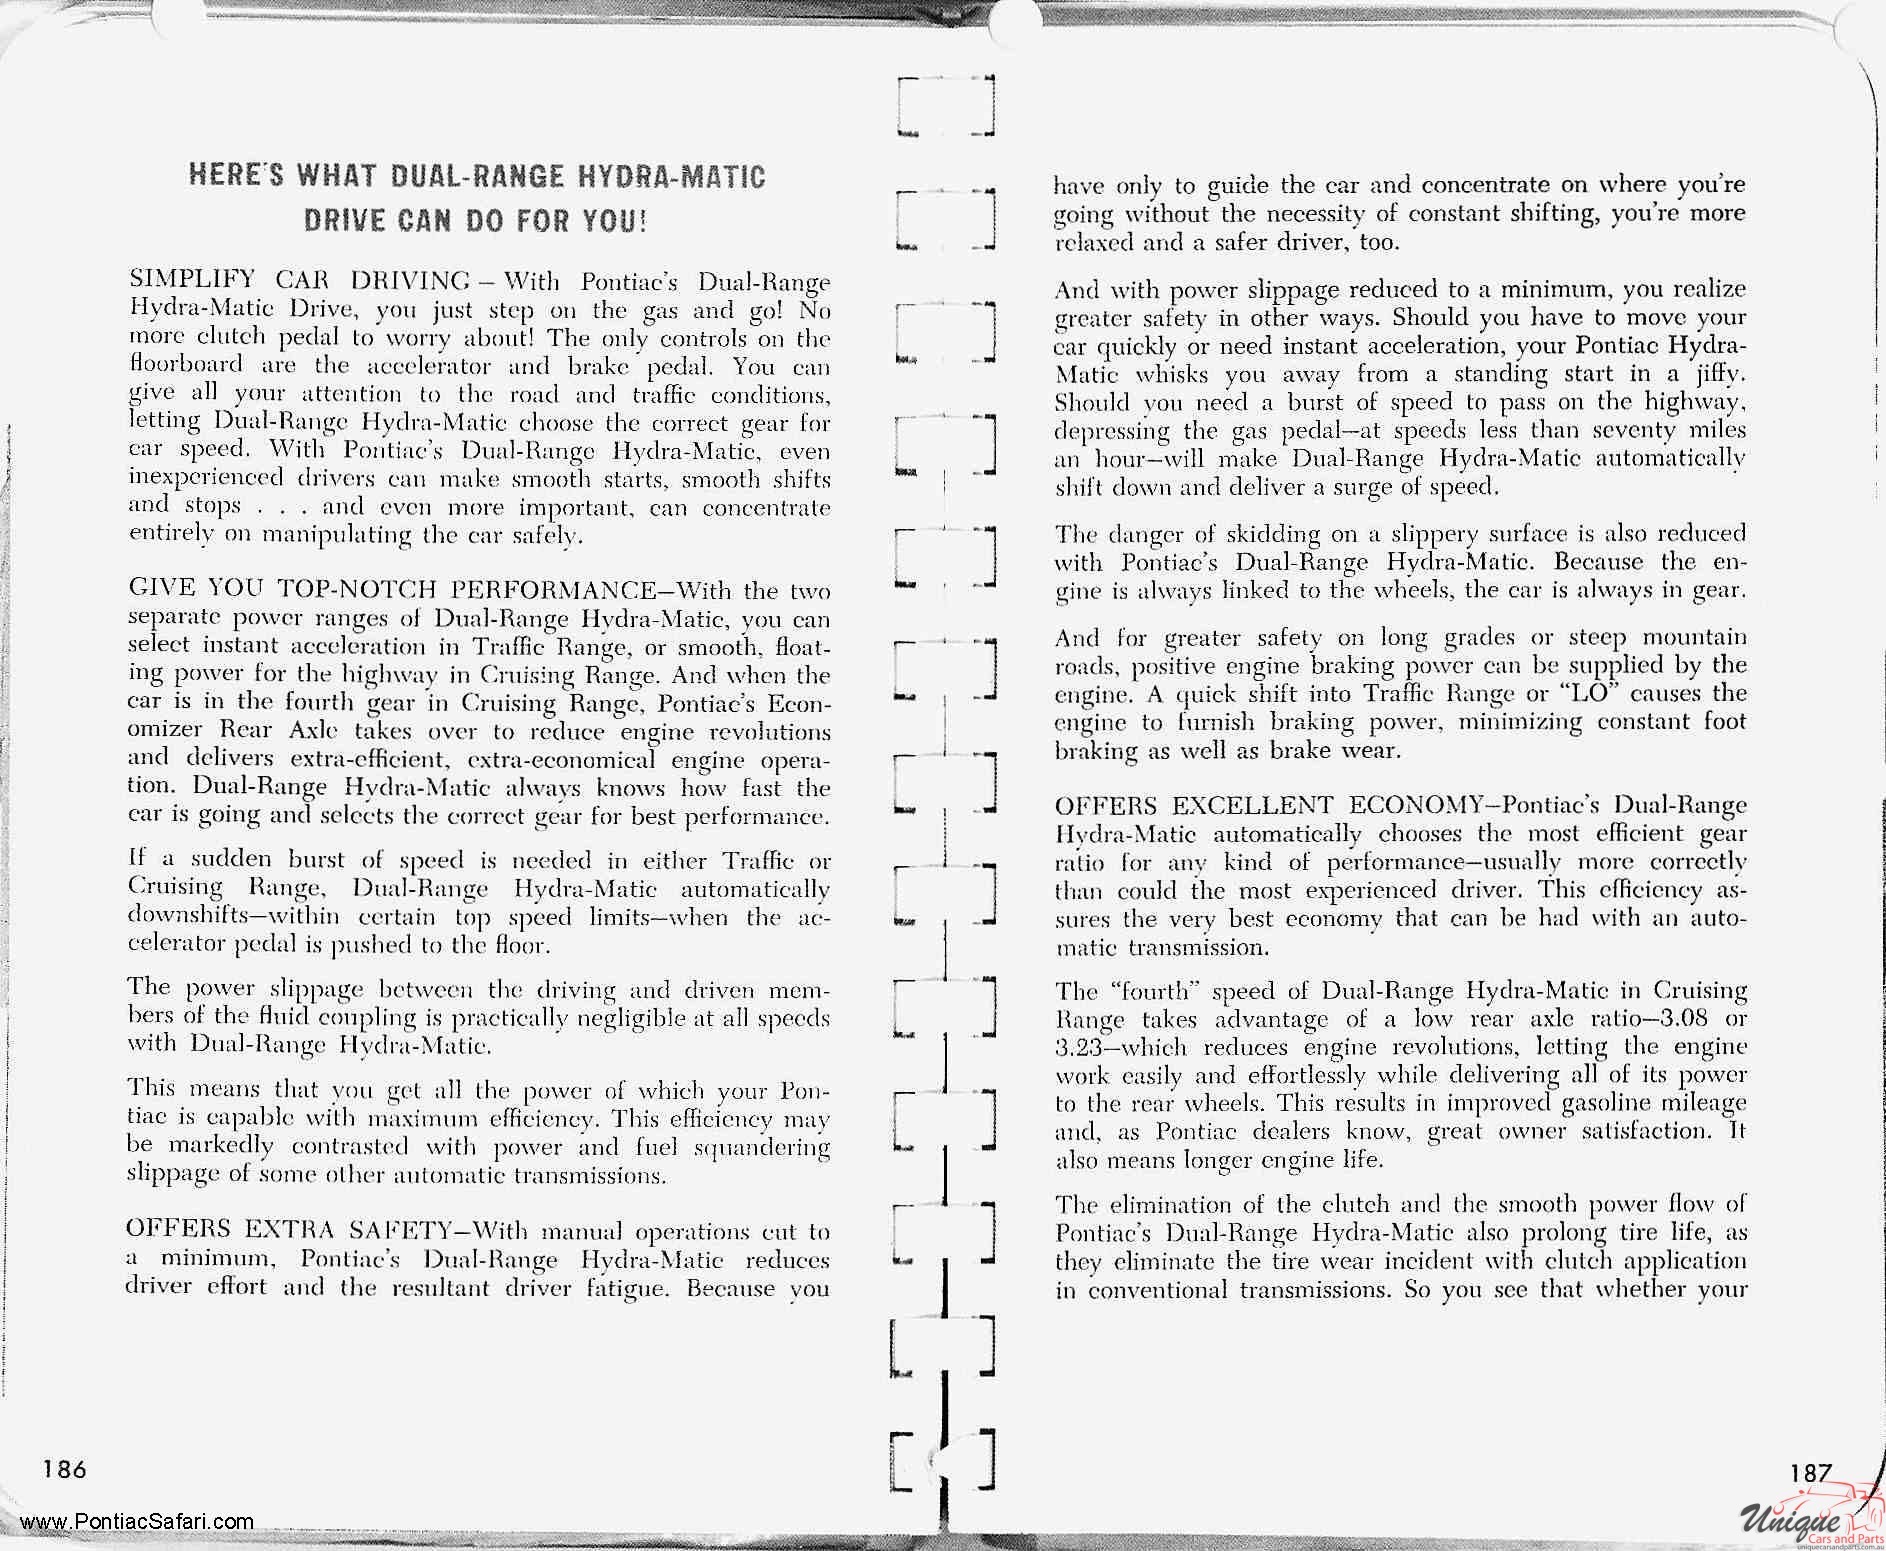 1956 Pontiac Facts Book Page 72